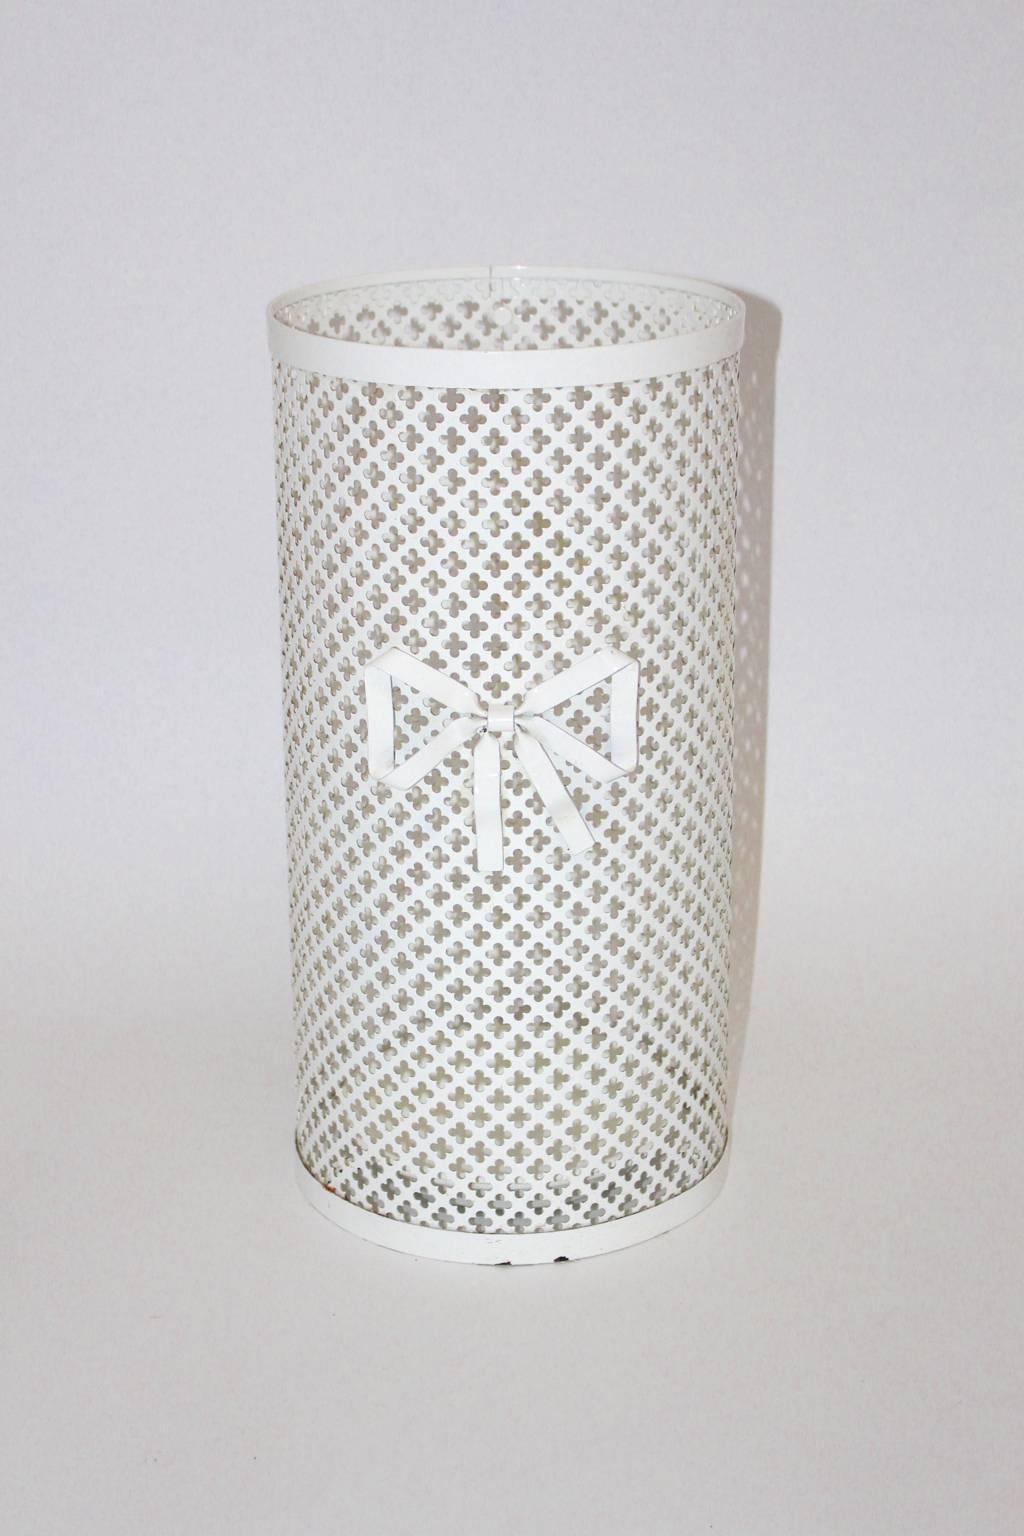 Elegant white enameled perforated umbrella stand made of metal with bow tie and white dipping pan.
To use as an umbrella stand and also as a waste basket.
Designed by Mathieu Matégot for Atelier Matégot.

This umbrella stand is in very good